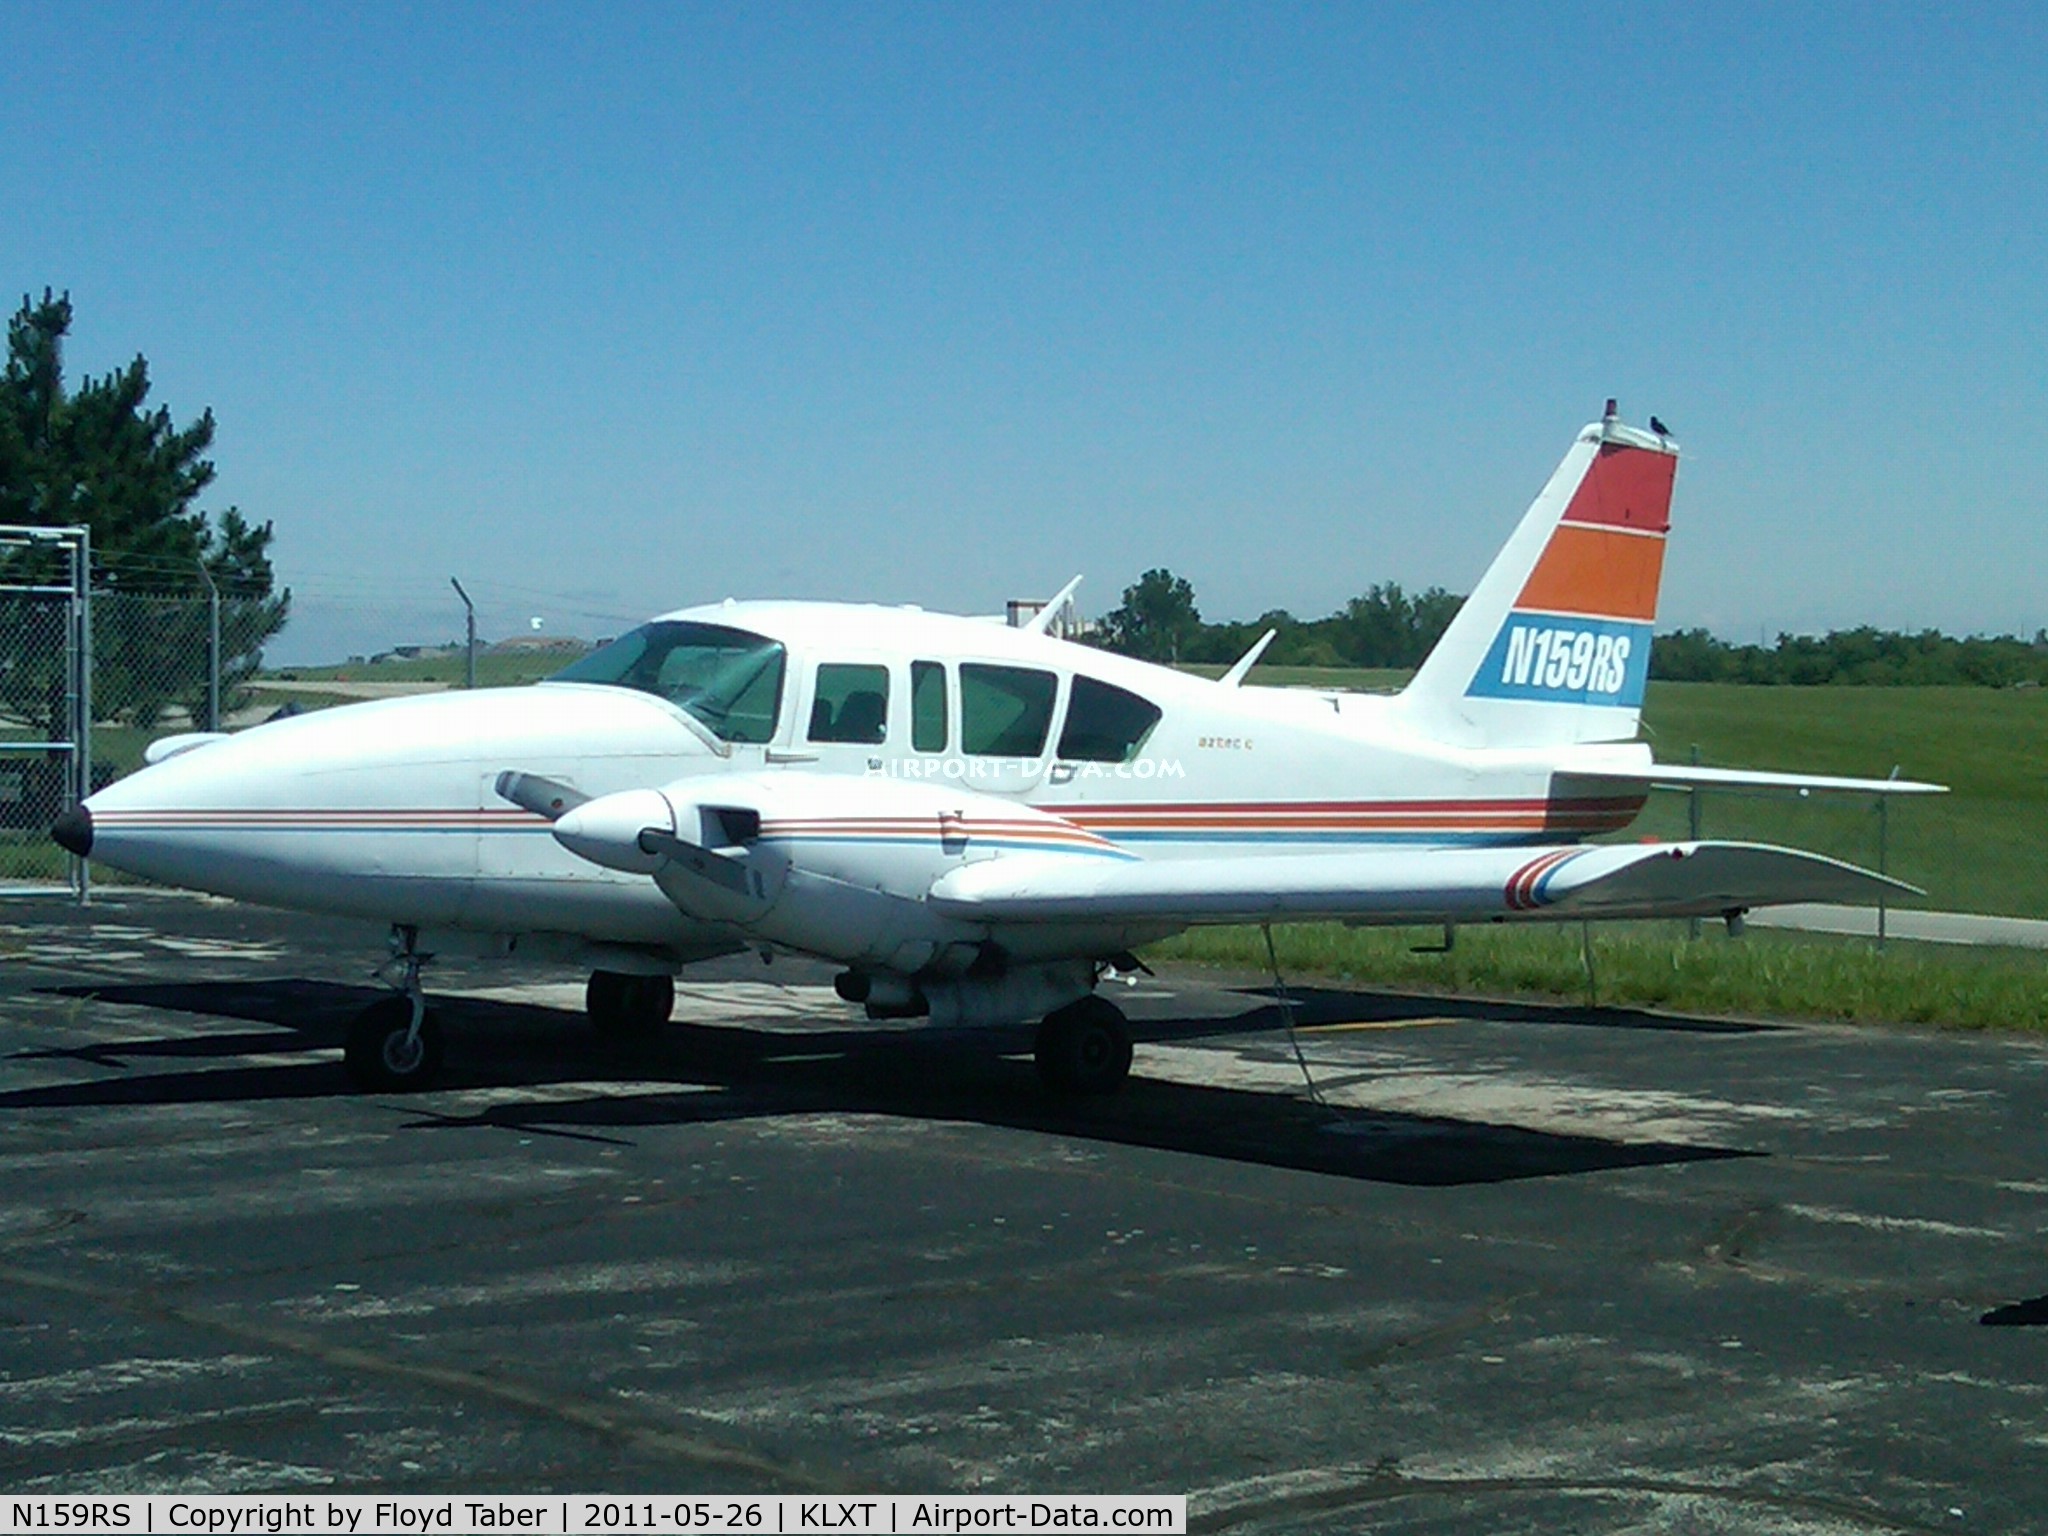 N159RS, 1965 Piper PA-23-250 C/N 27-2817, Sitting in a state of neglect